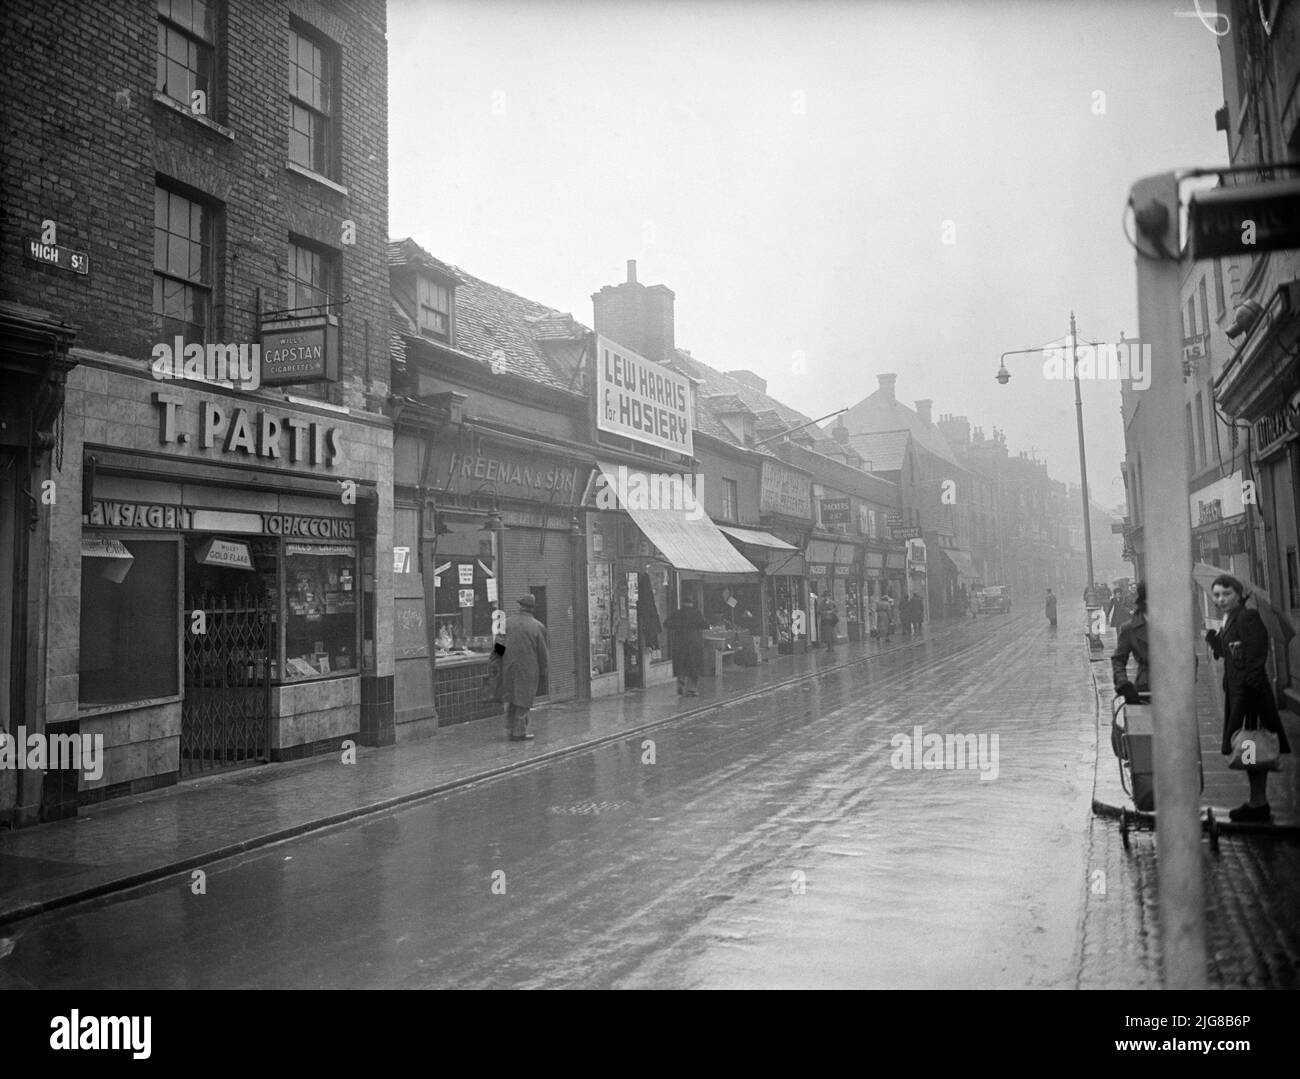 High Street, Chatham, Medway, 1942. View from the north-west showing terraced shops on the north side of the High Street, with number 277 in the foreground. The premises of T Partis, shown in this photograph as a newsagent and tobacconist, were at 277 High Street. This building, which still stands, is now (2021) occupied by a barber's shop. The adjoining buildings with dormer windows have been demolished and replaced with modern buildings, but the shops in the background of the picture are also still standing. Stock Photo